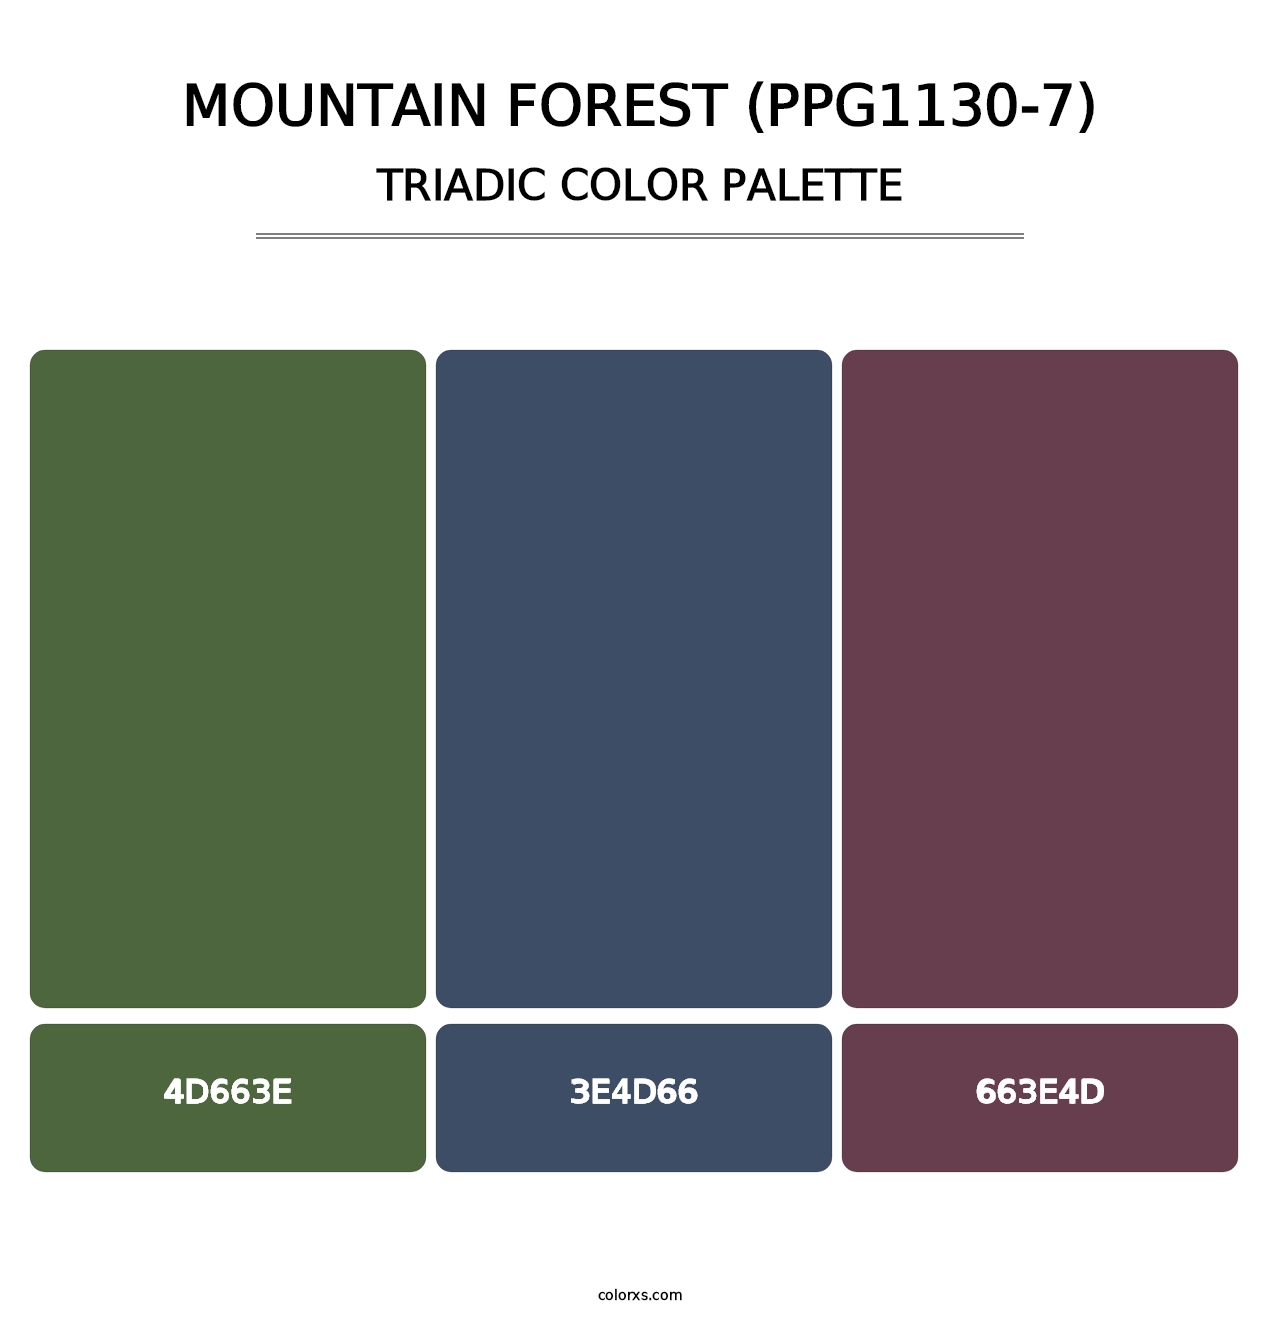 Mountain Forest (PPG1130-7) - Triadic Color Palette